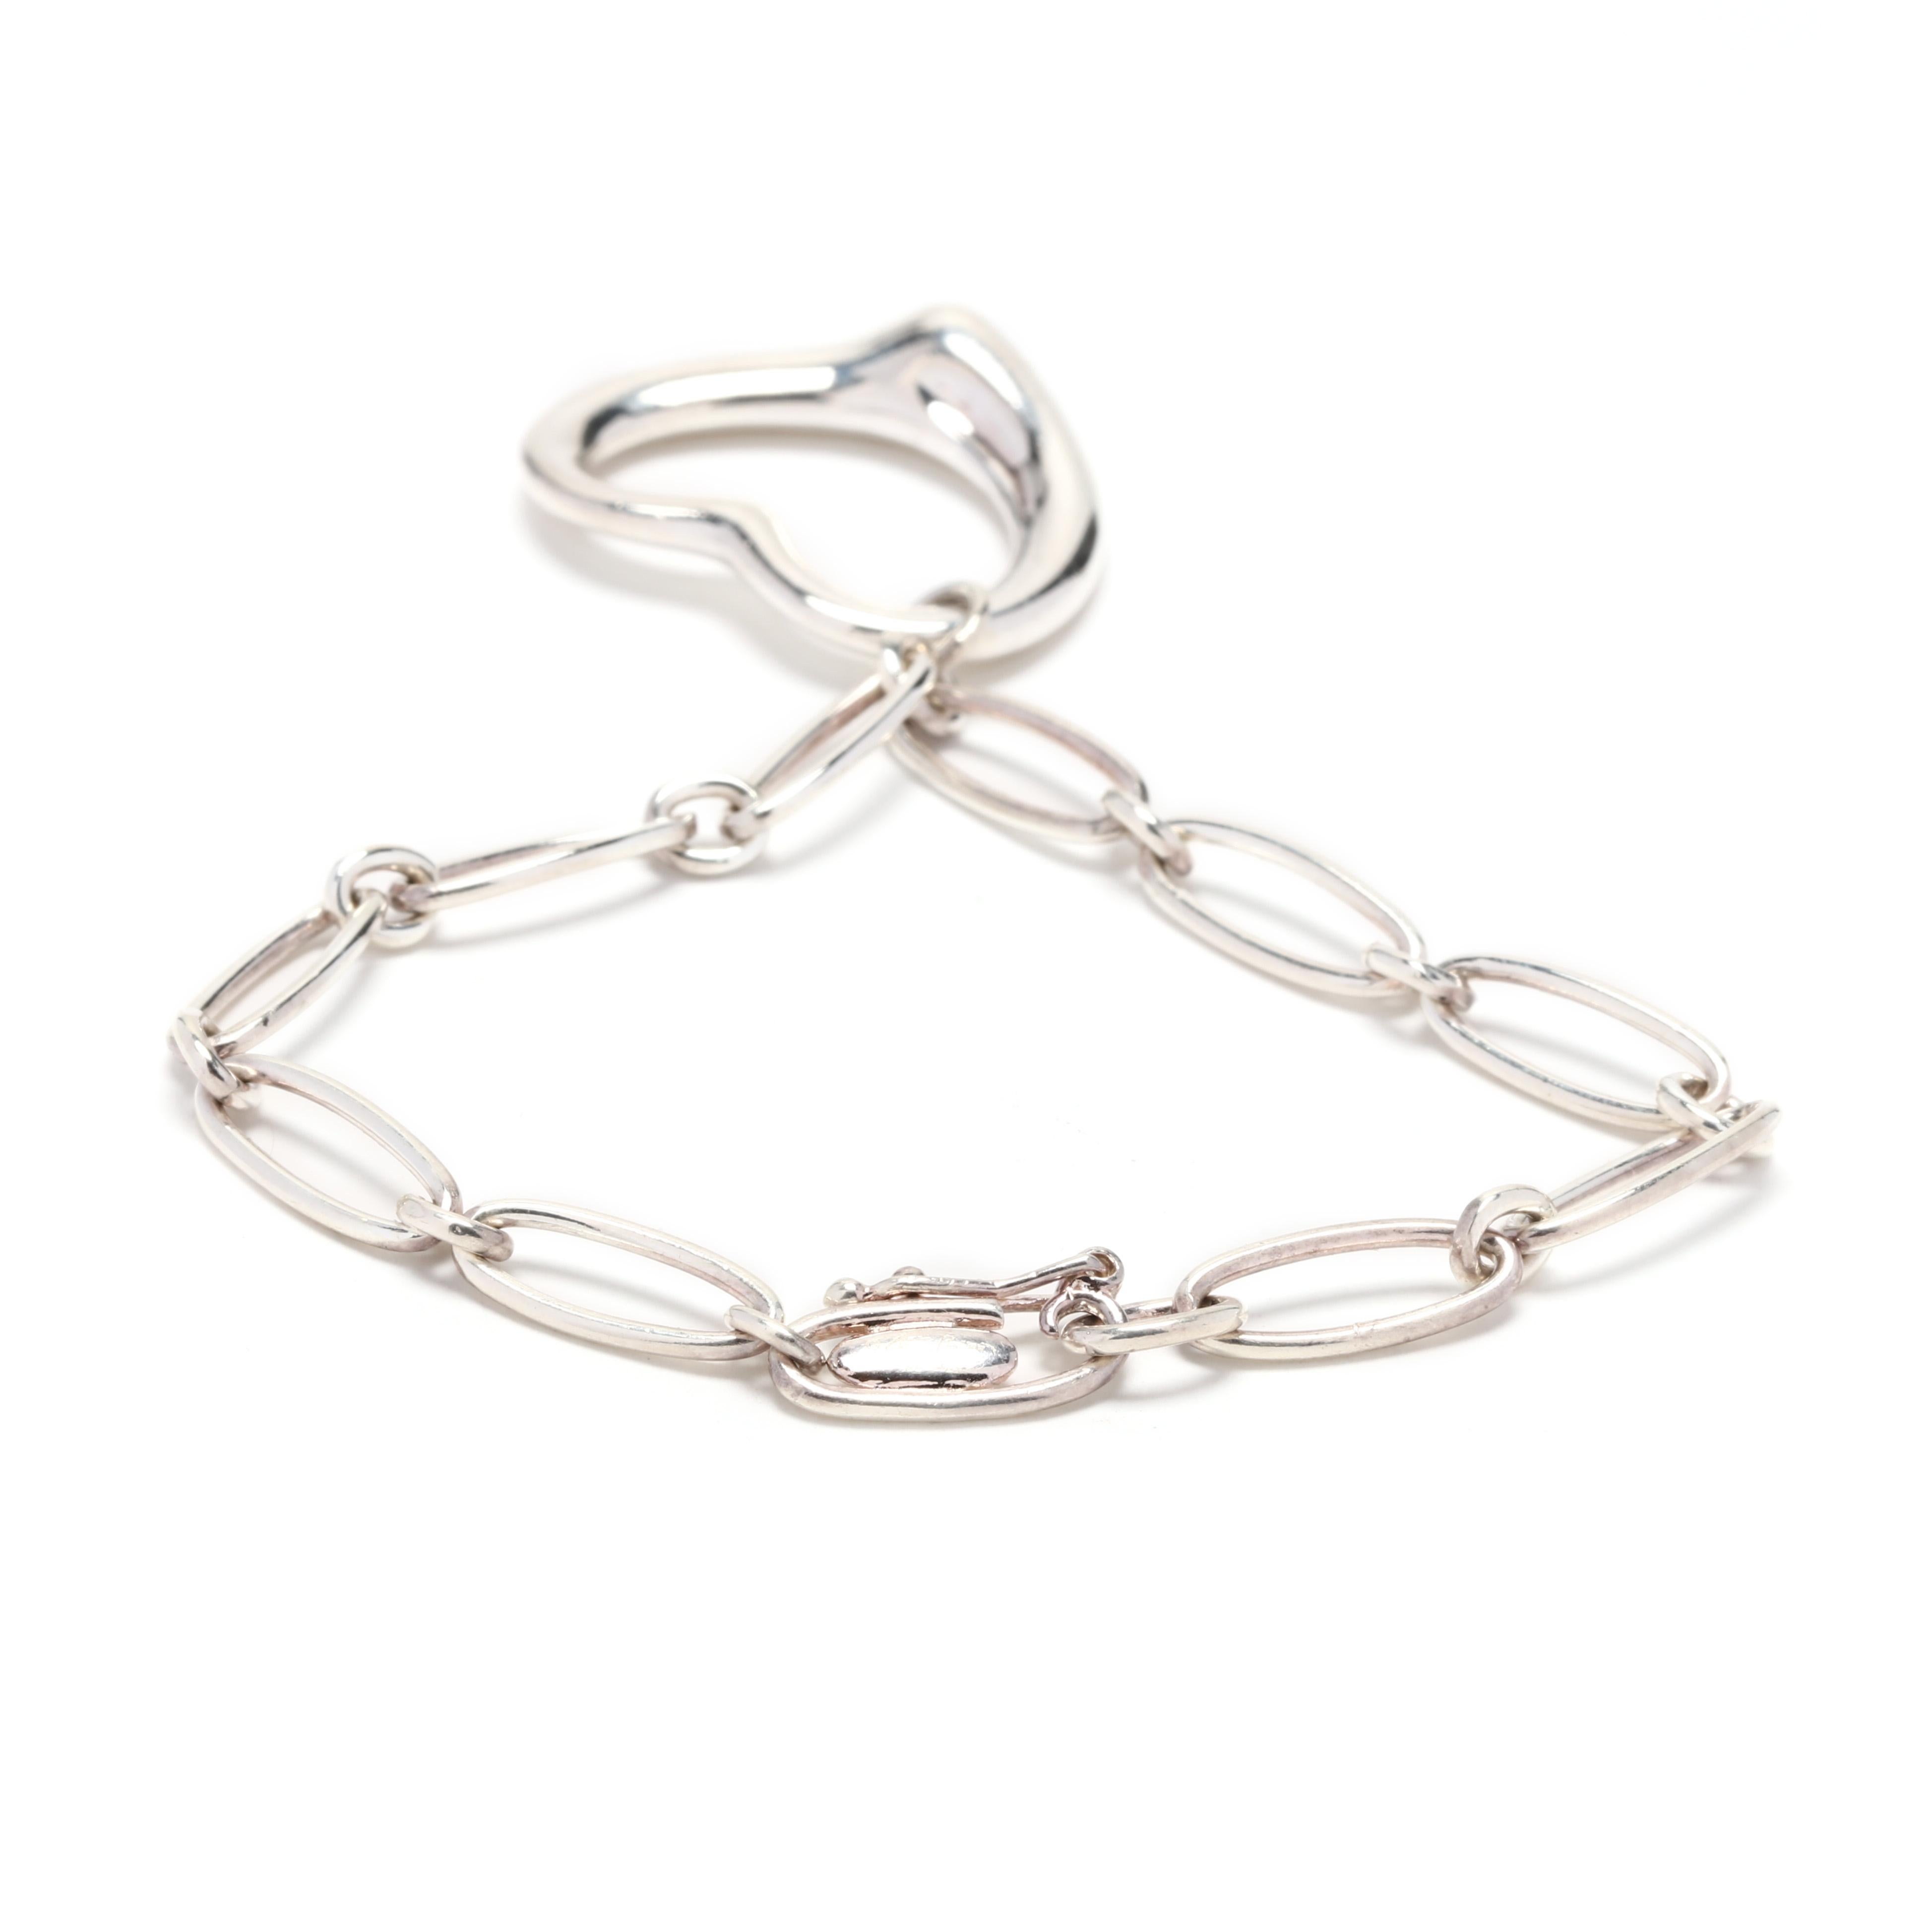 A Tiffany and Company sterling silver open heart charm bracelet. This bracelet features alternating oblong oval and round links with a large tapered open heart charm and a hidden clasp.



Length: 6.5 in.



Width of Bracelet: 5.75 mm



Length of